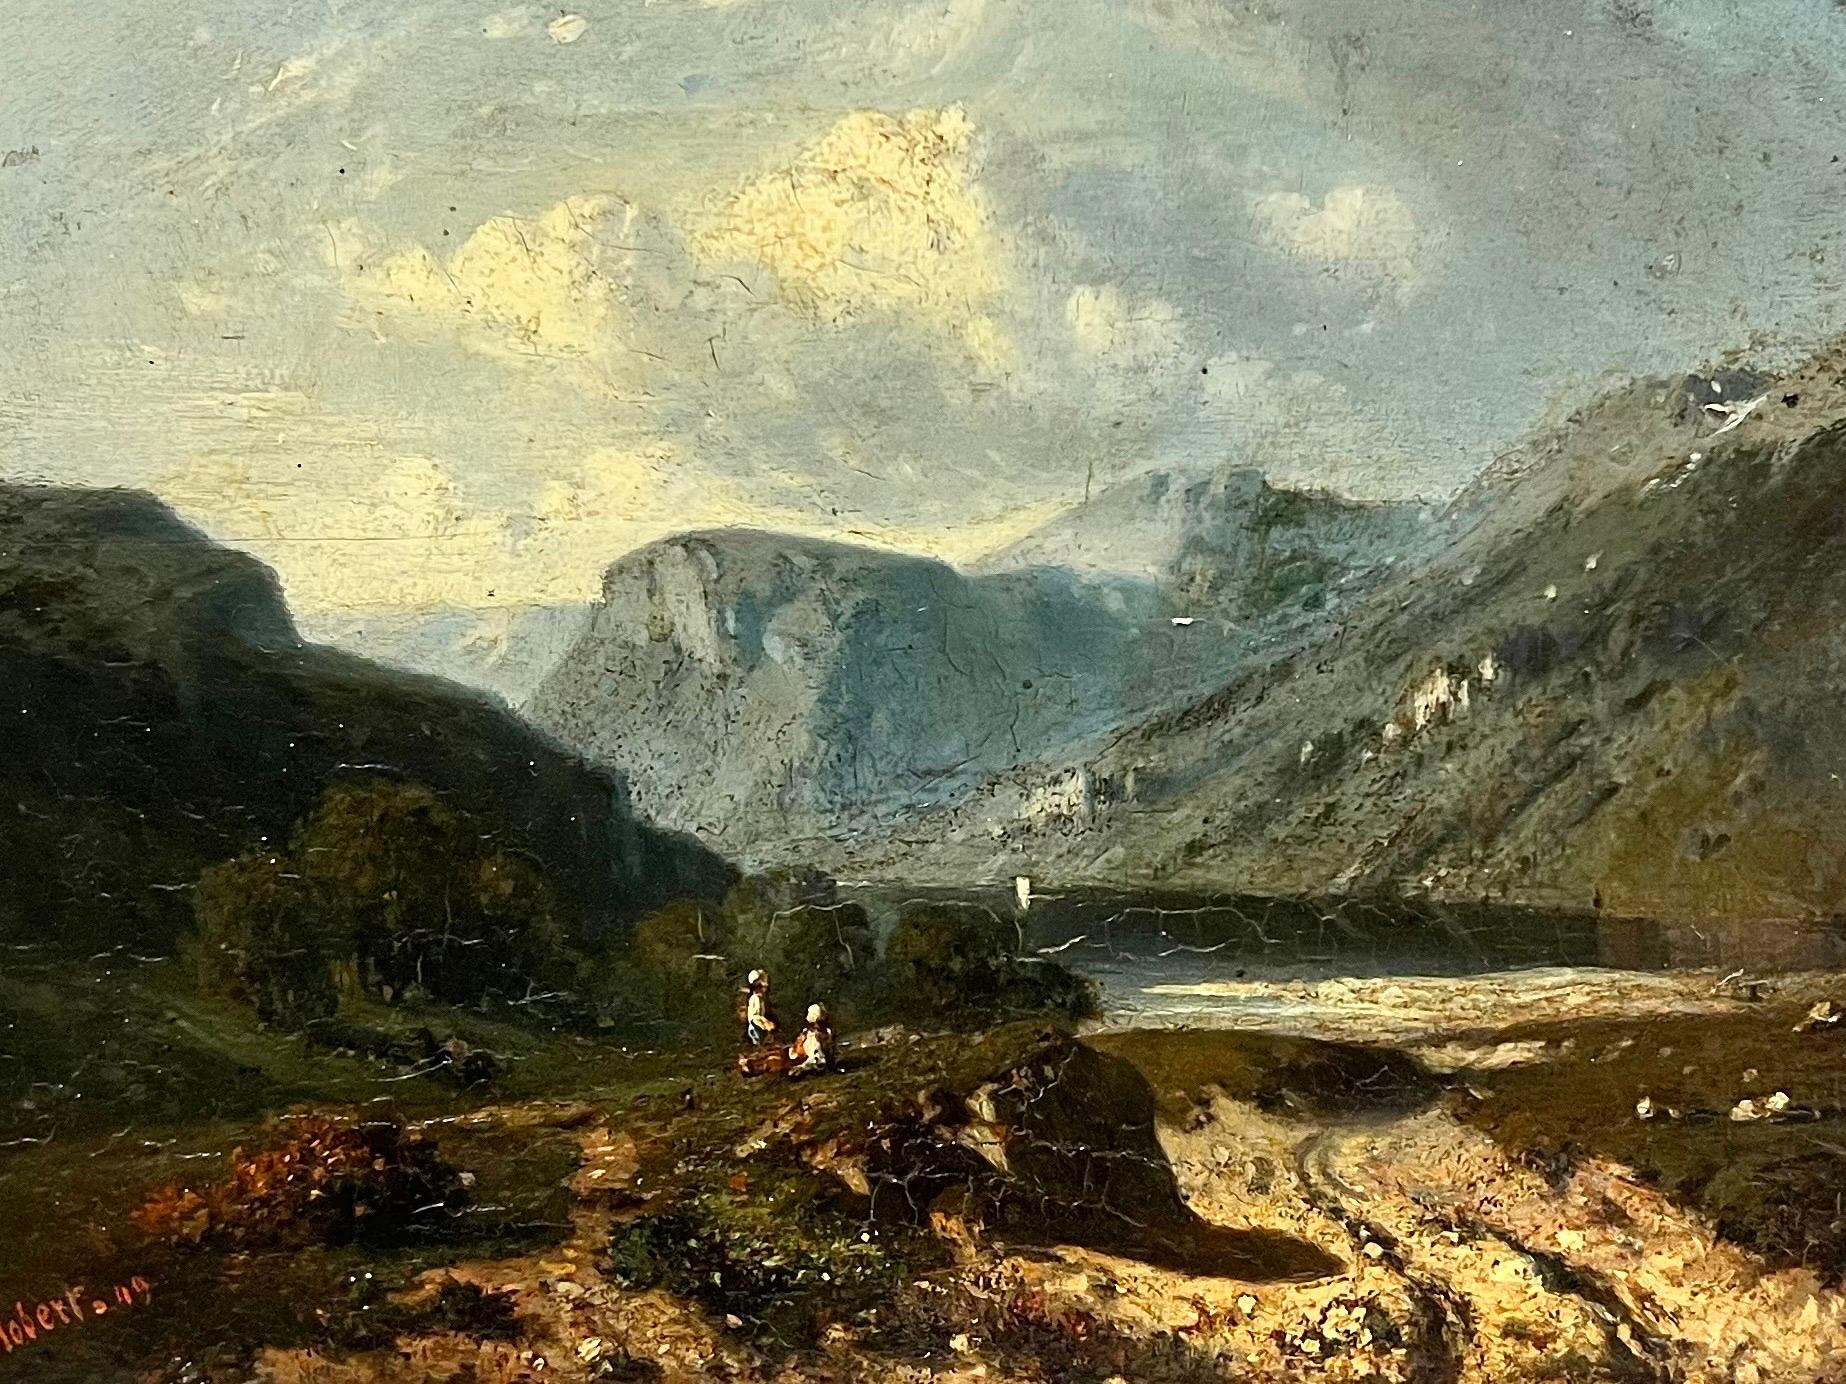 The Scottish Landscape
Scottish School, 19th century
signed A. Robert, dated  (18)99
oil on board, framed
framed: 12 x 14.5 inches
board: 7 x 9 inches
provenance: private collection, UK
condition: very good and sound condition  